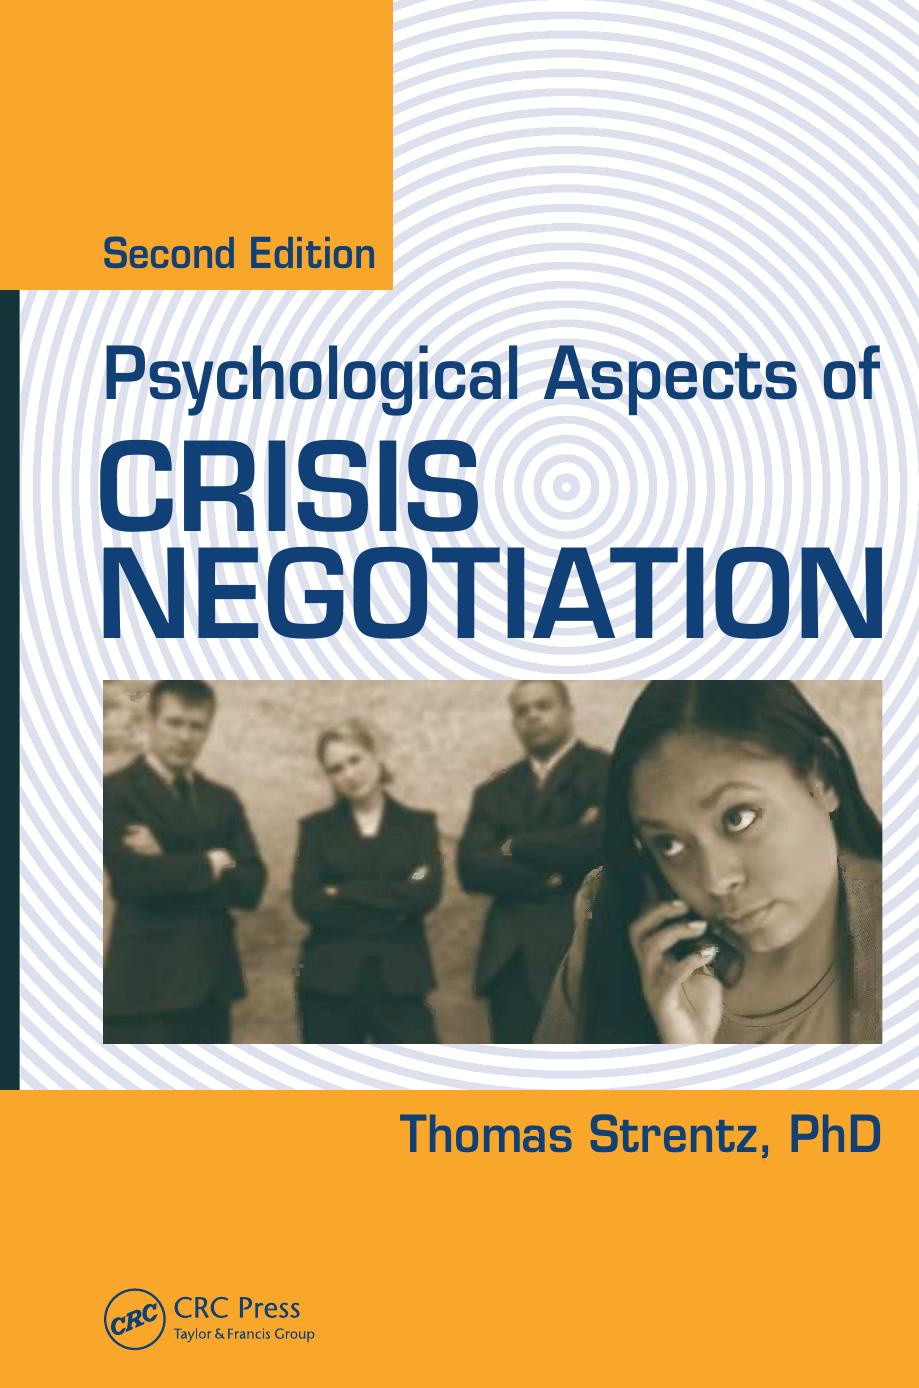 Psychological Aspects of Crisis Negotiation, Second Edition by Thomas Strentz